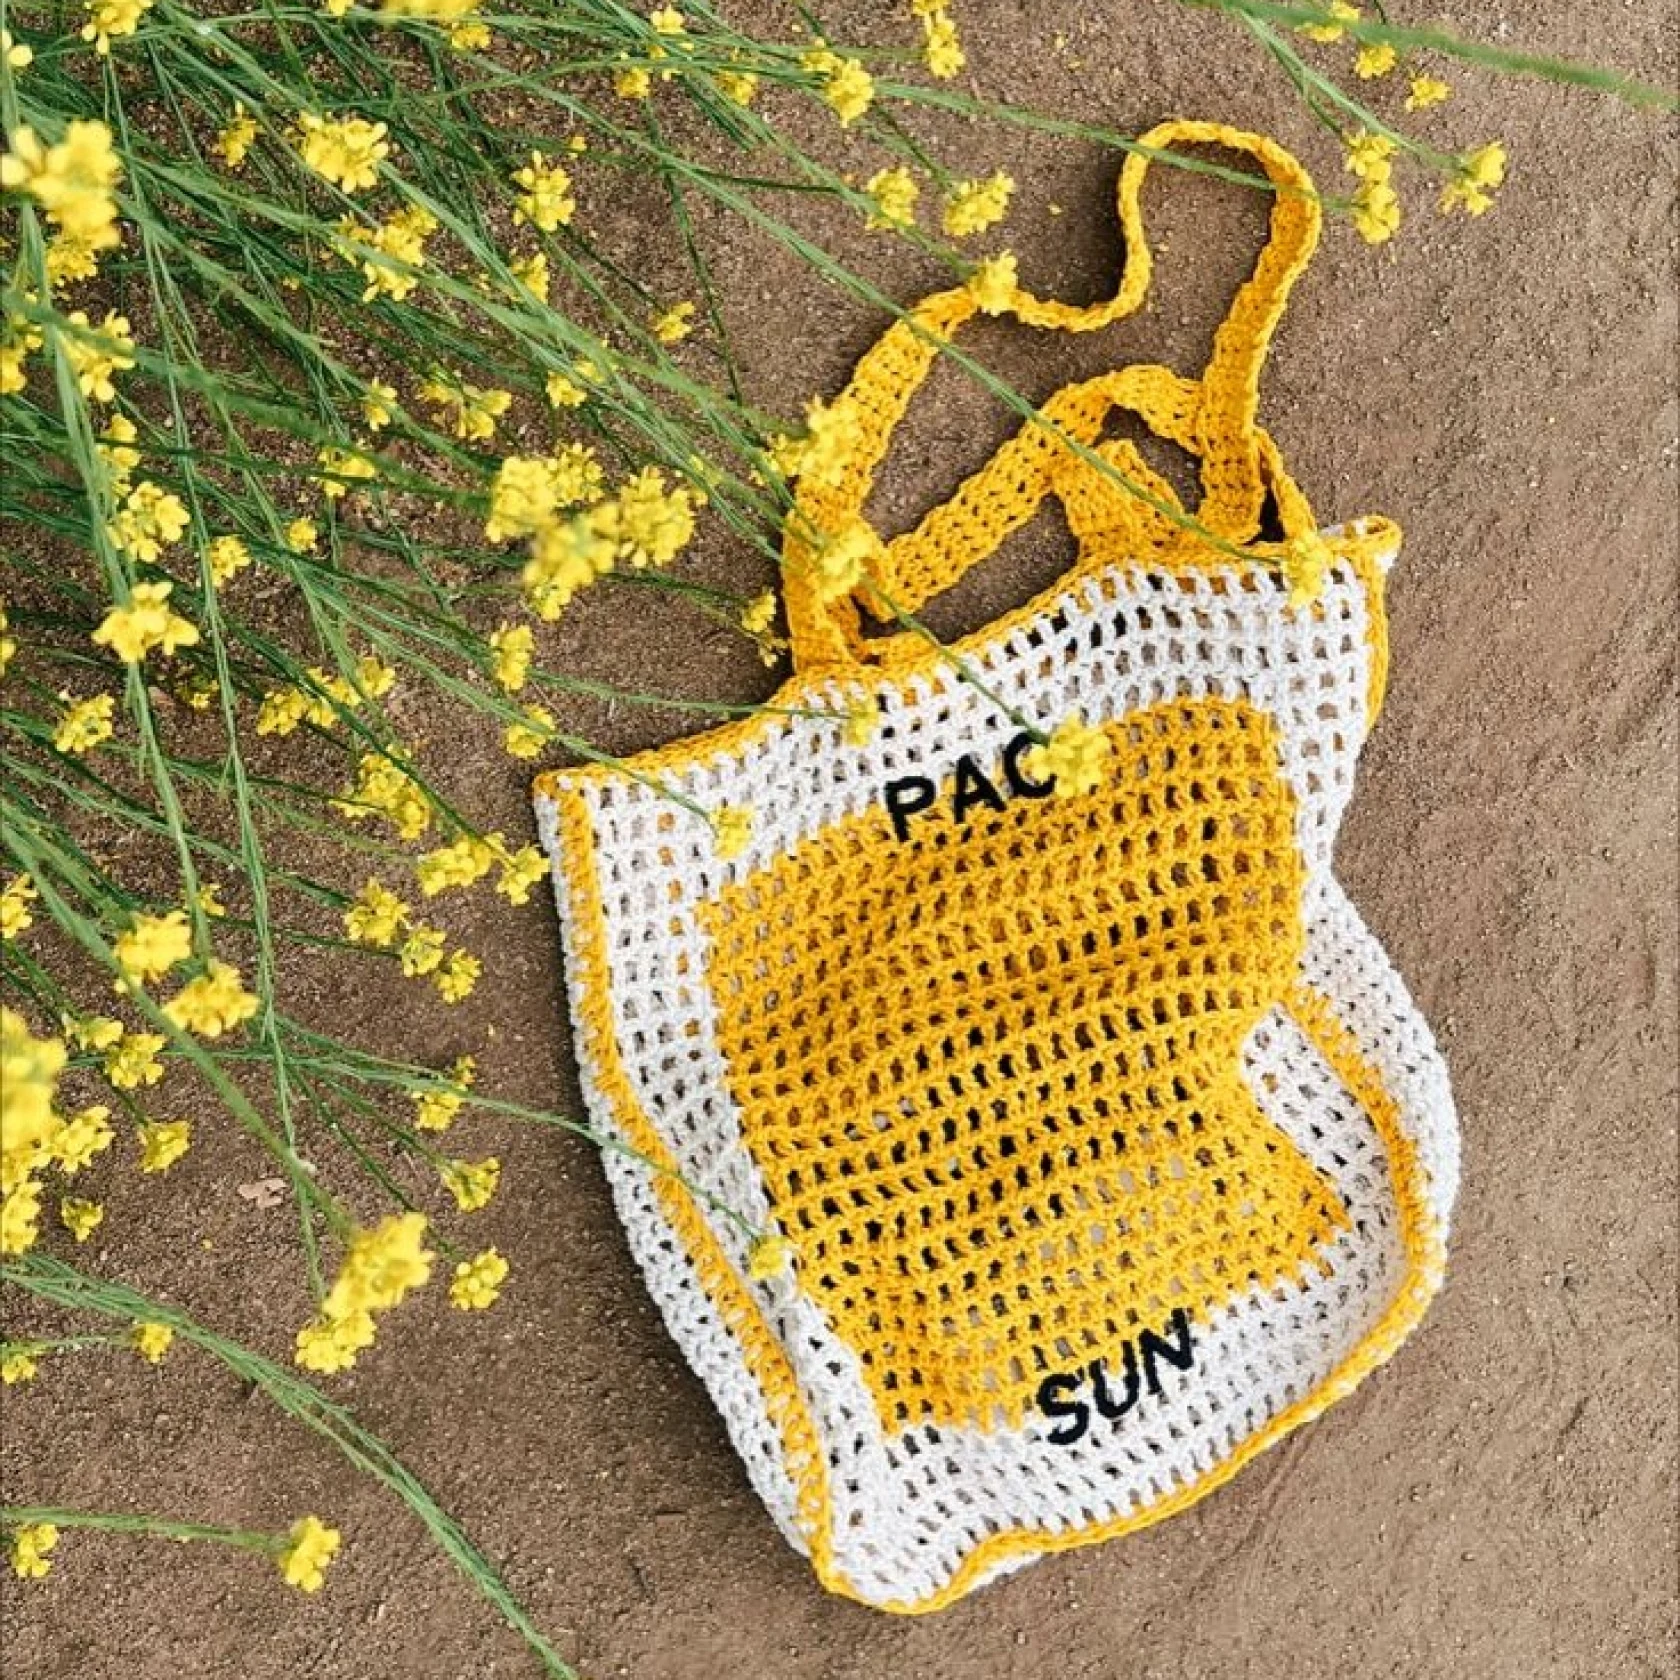 A crocheted white and yellow bag that reads Pac Sun lies on the ground next to yellow wildflowers